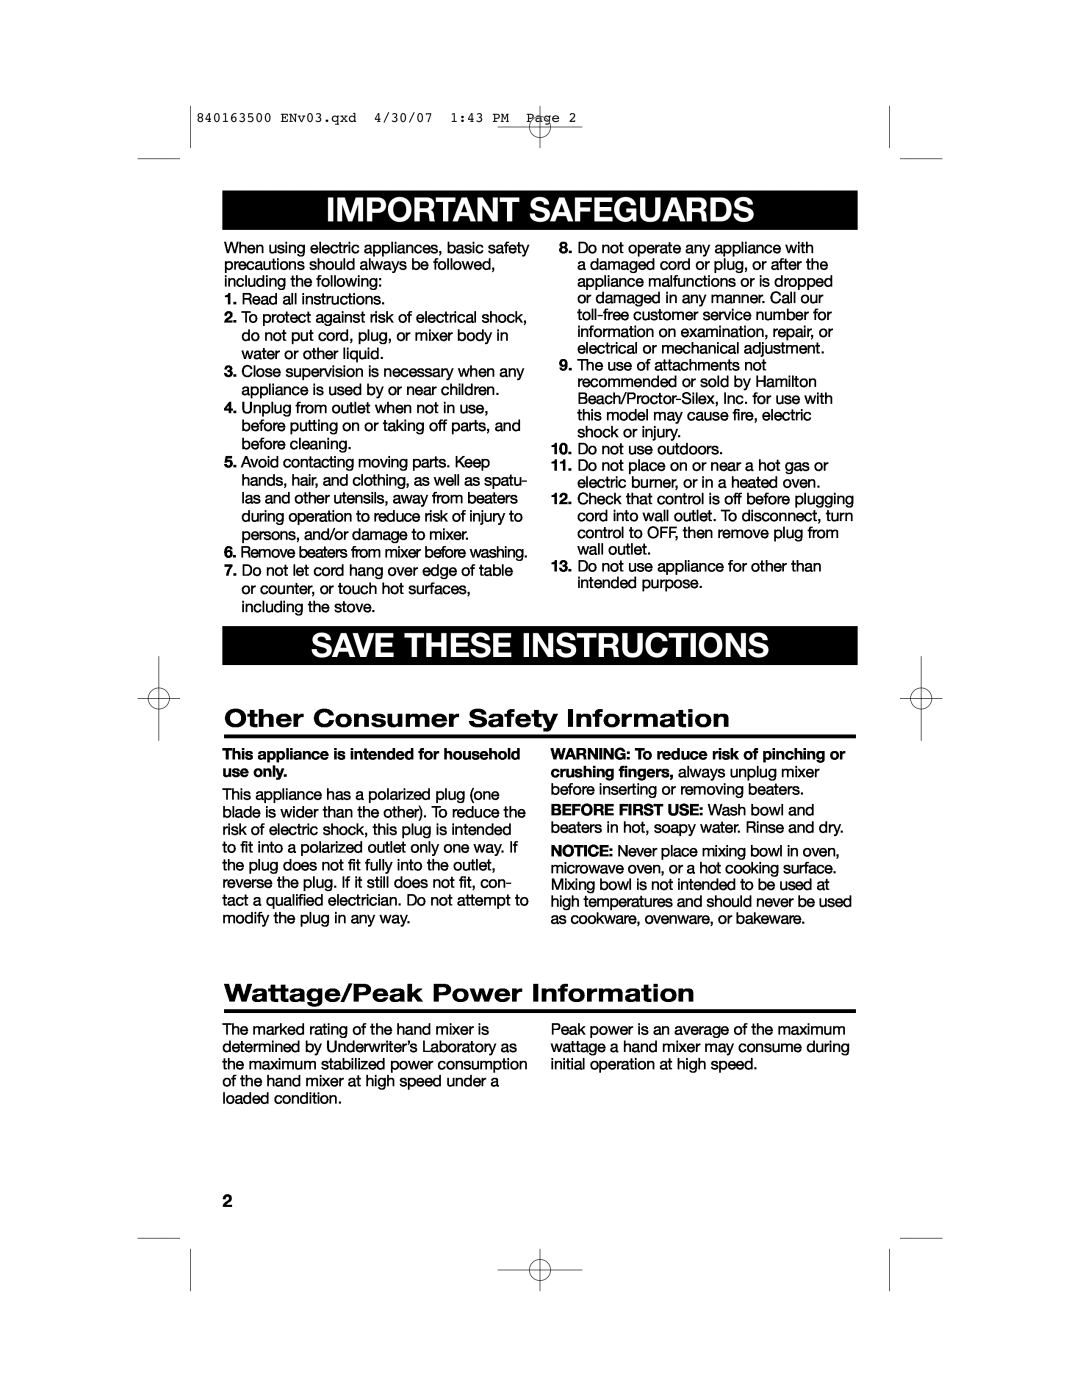 Hamilton Beach 64695N manual Important Safeguards, Save These Instructions, Other Consumer Safety Information 